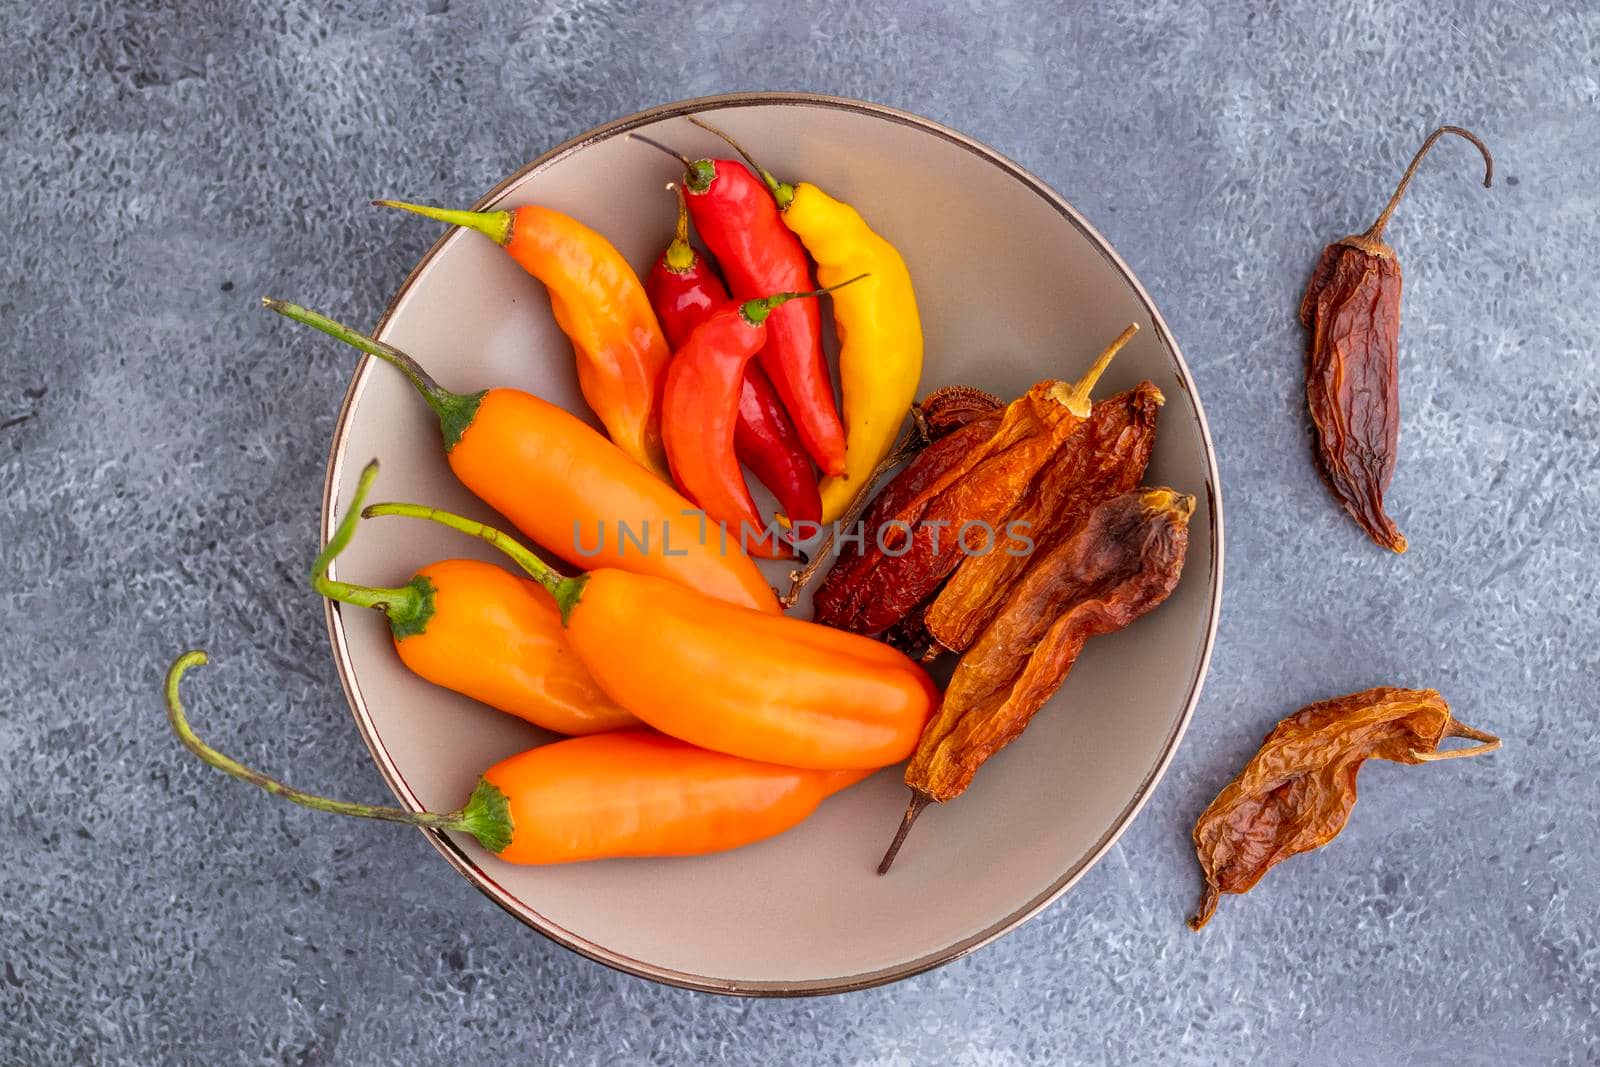 View of several Peruvian peppers, such as yellow chili, limo chili and paprika